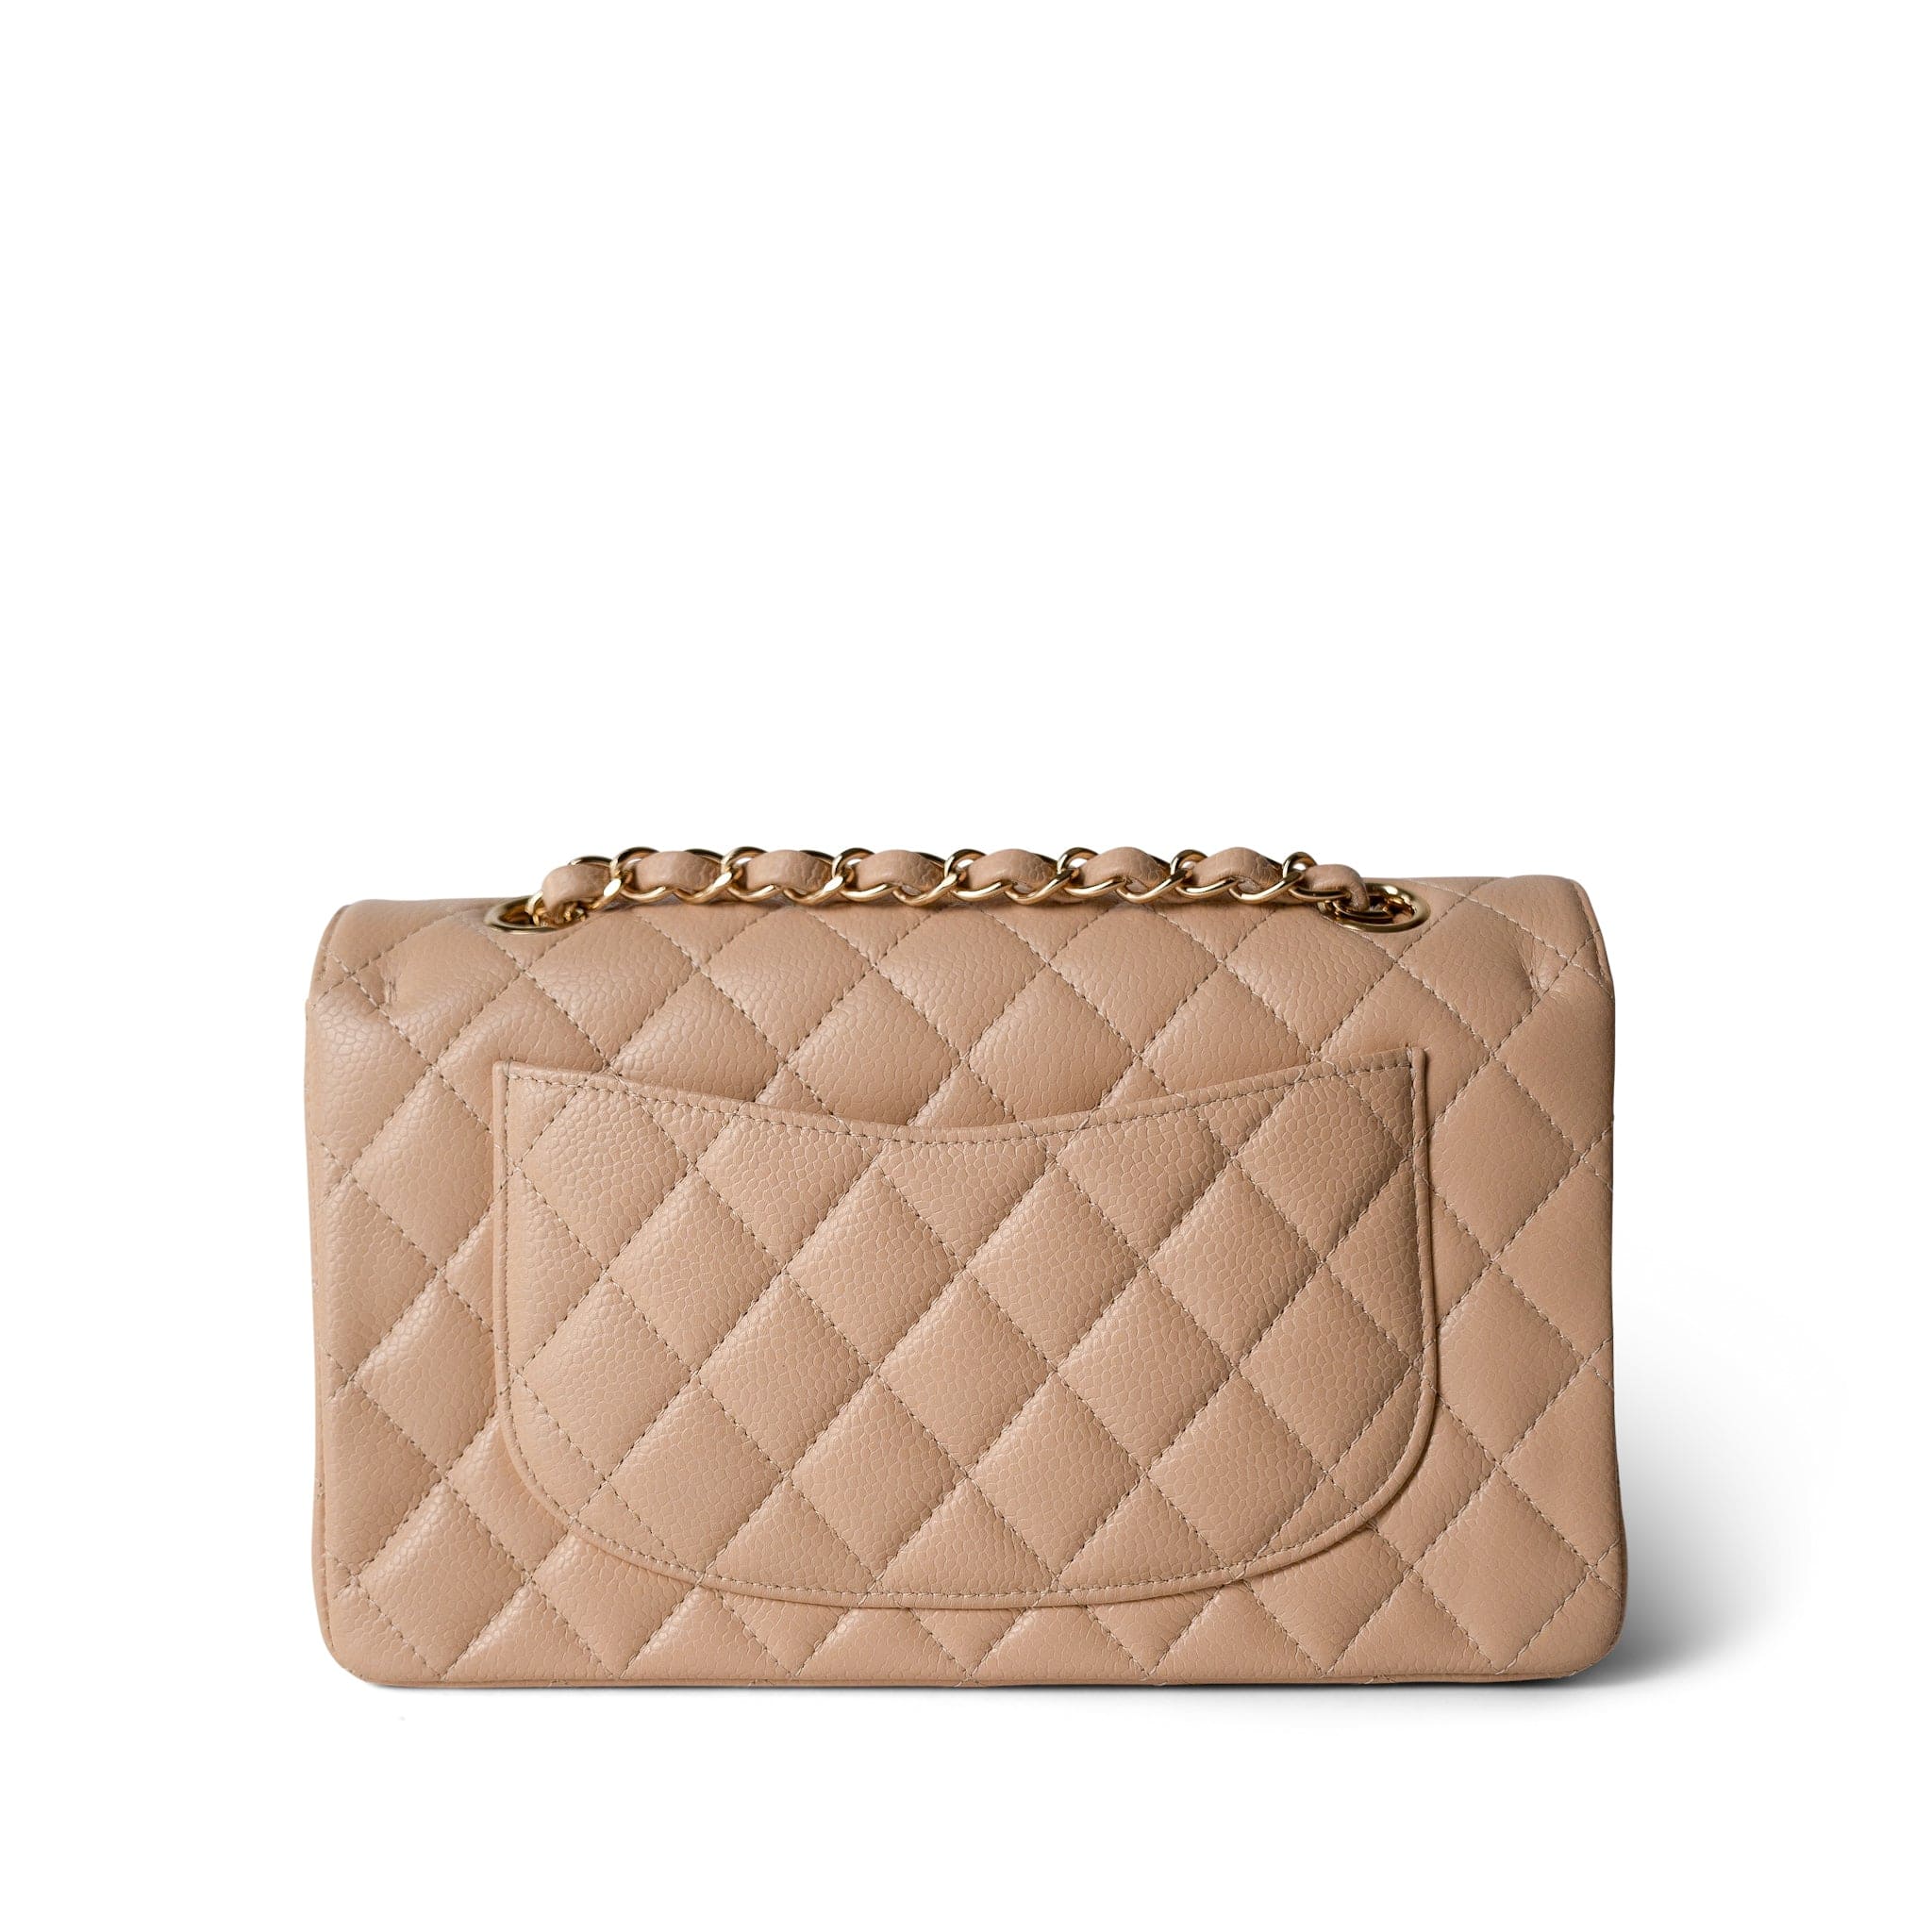 CHANEL Handbag Beige Beige Clair Caviar Quilted Classic Flap Small Gold Hardware - Redeluxe